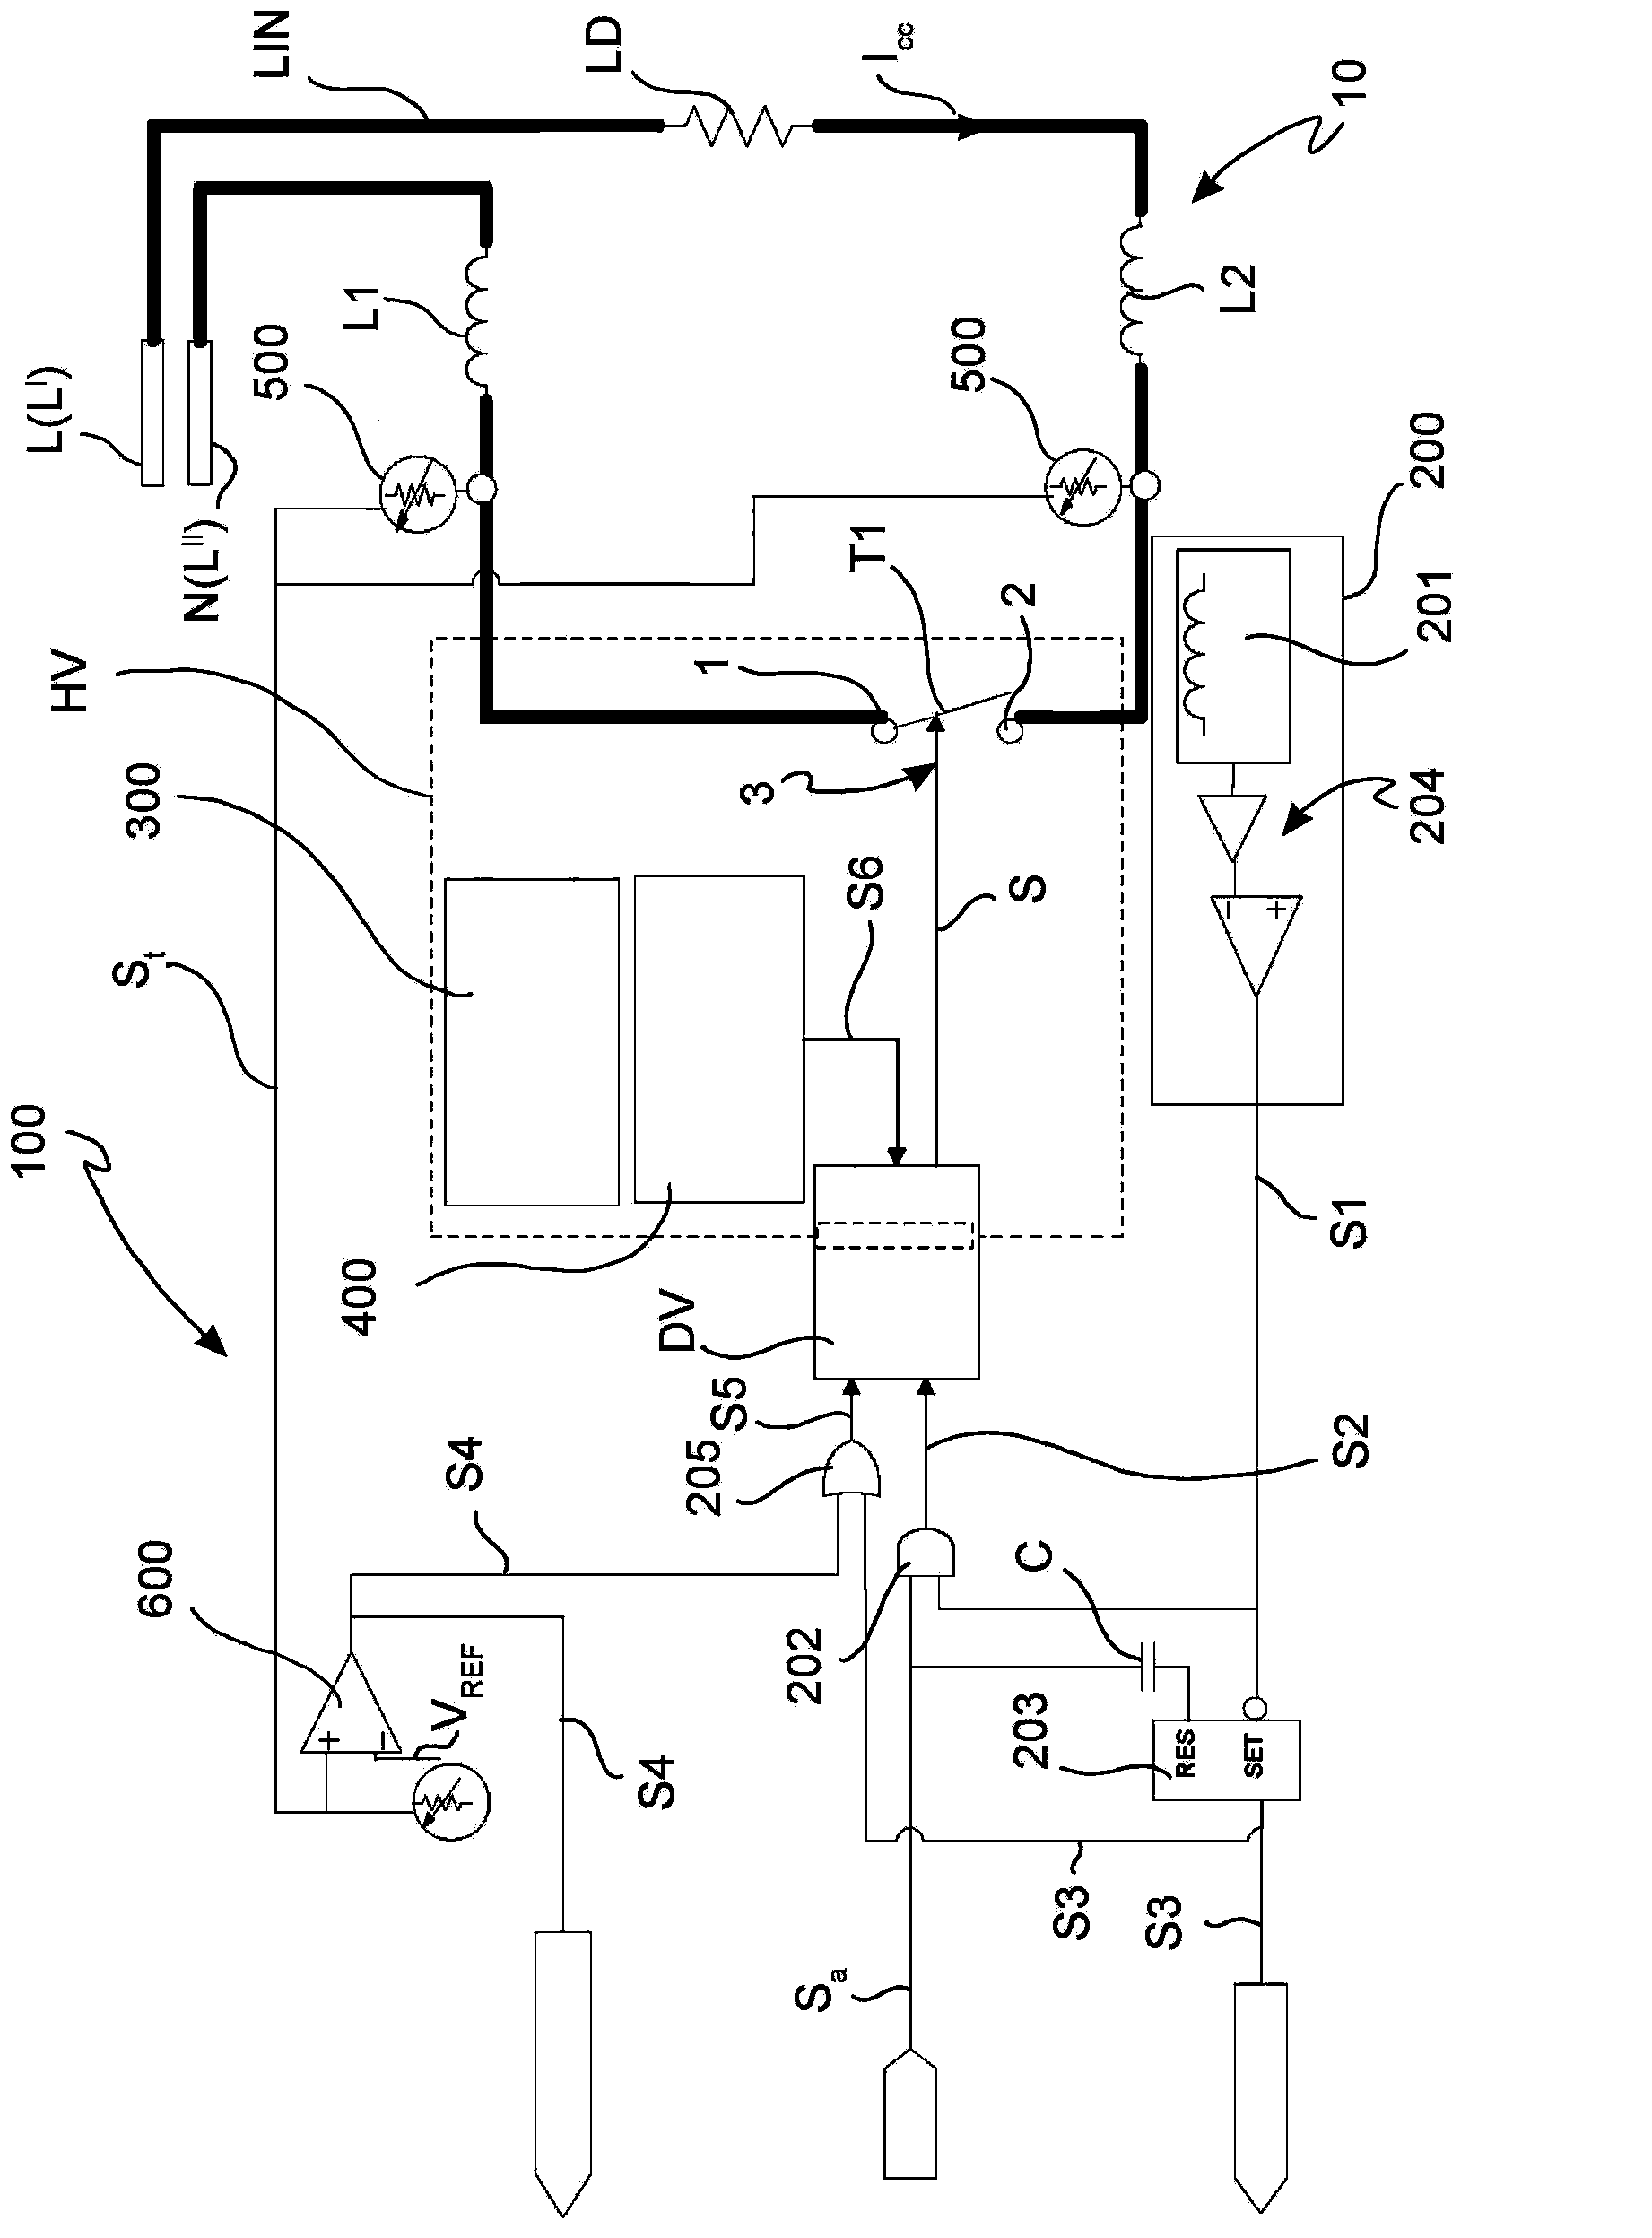 Circuit breaker for protecting an electrical system